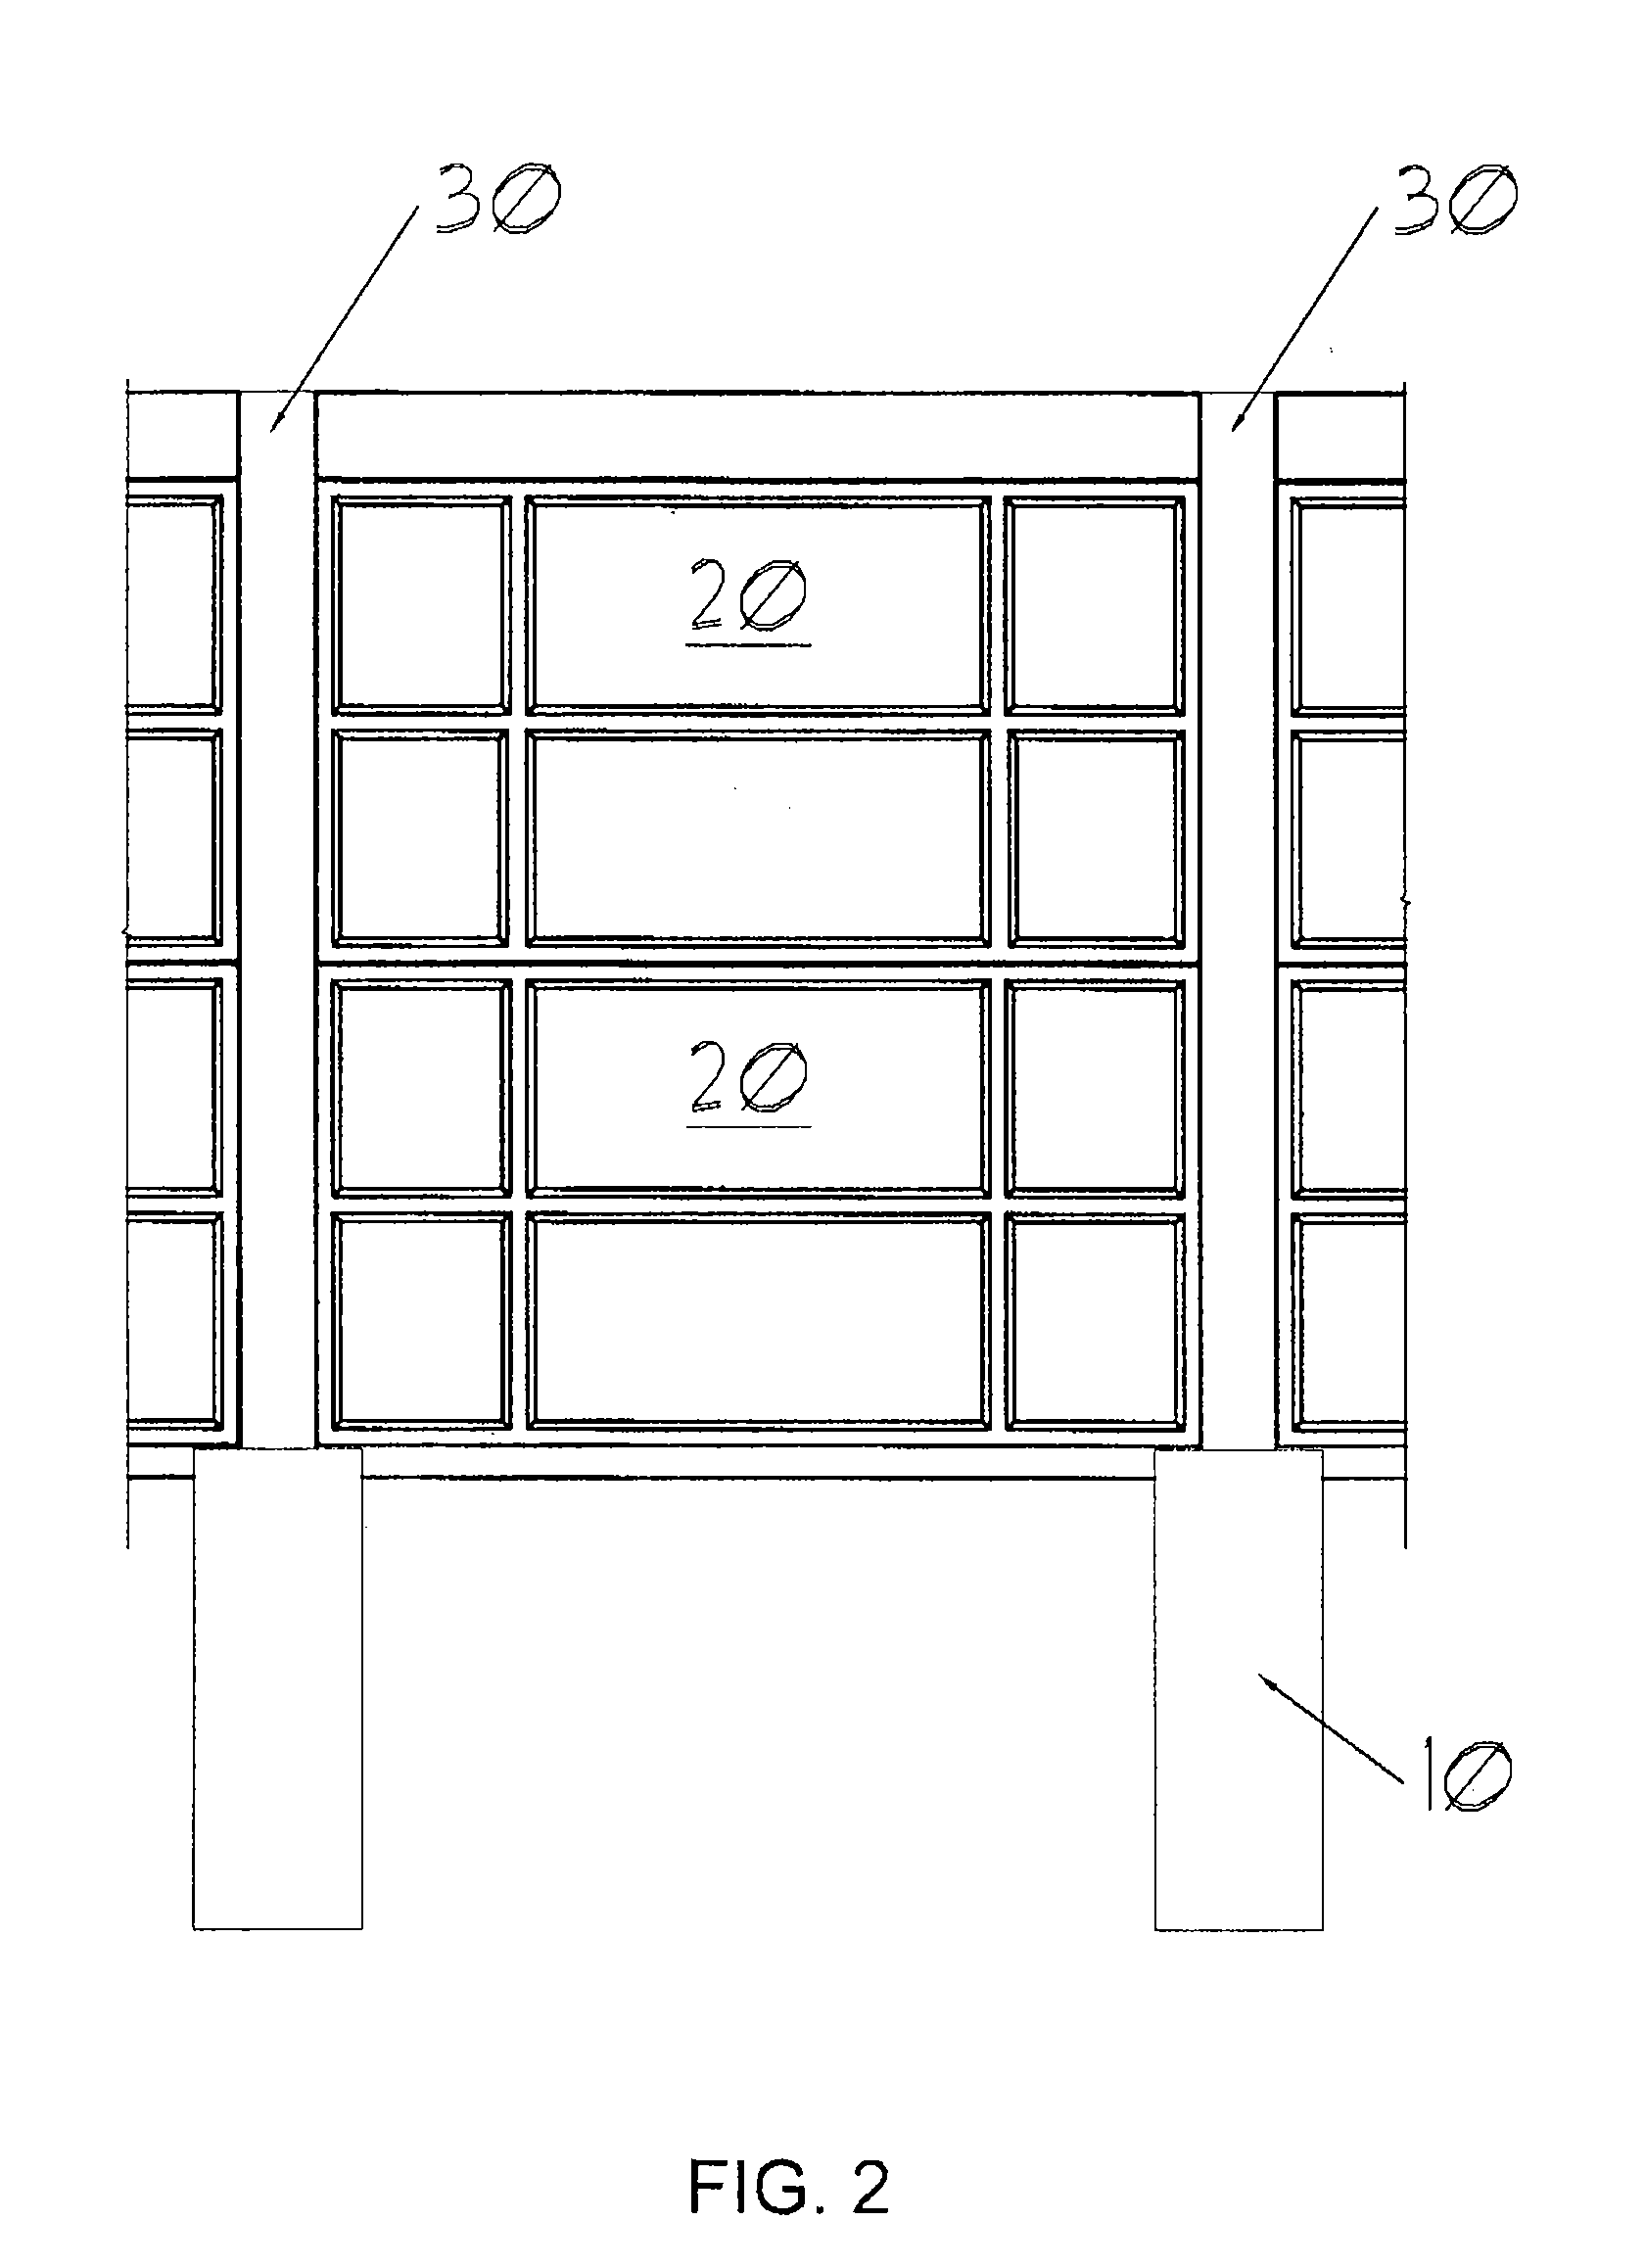 Precast structure and method of construction